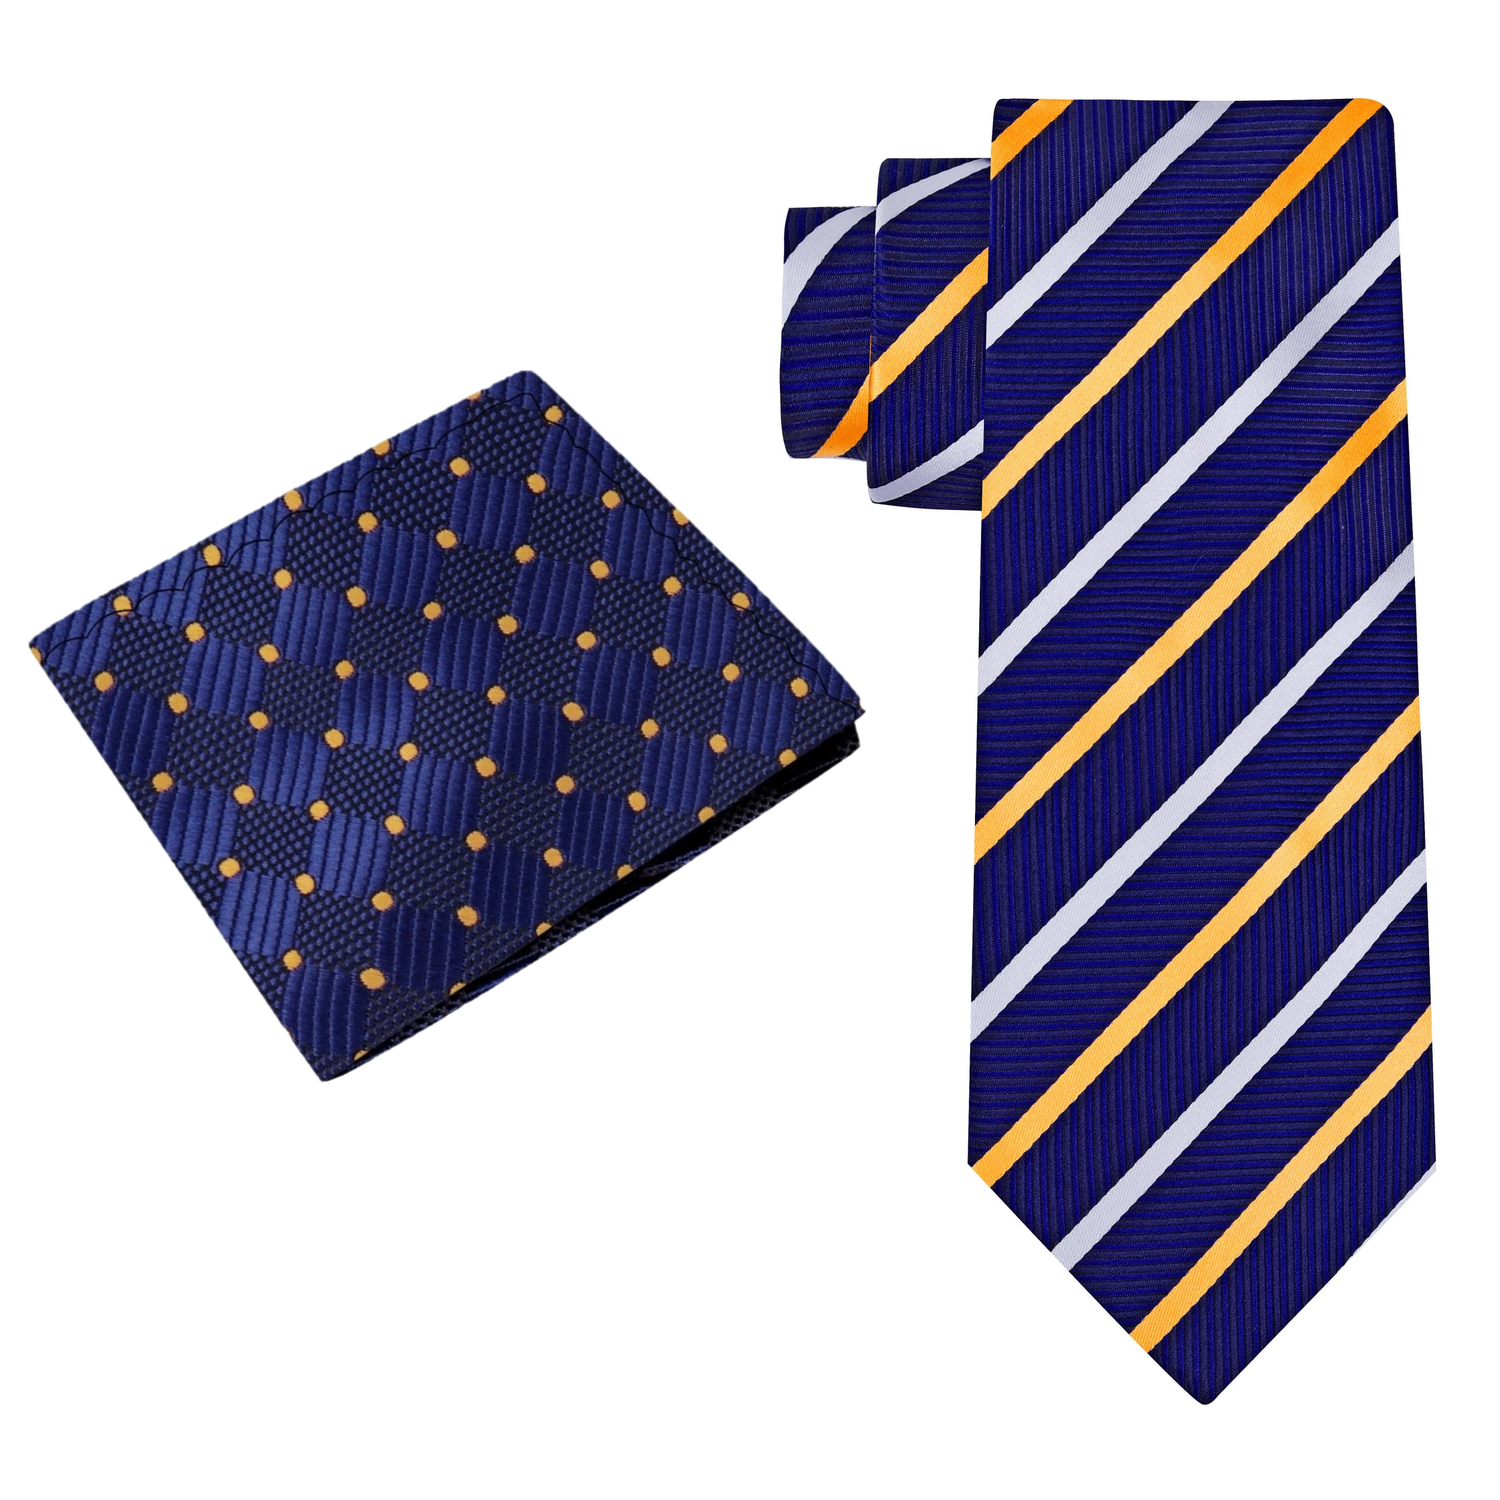 Alt View: Blue Gold White Stripe Tie with Blue Gold Dot Square